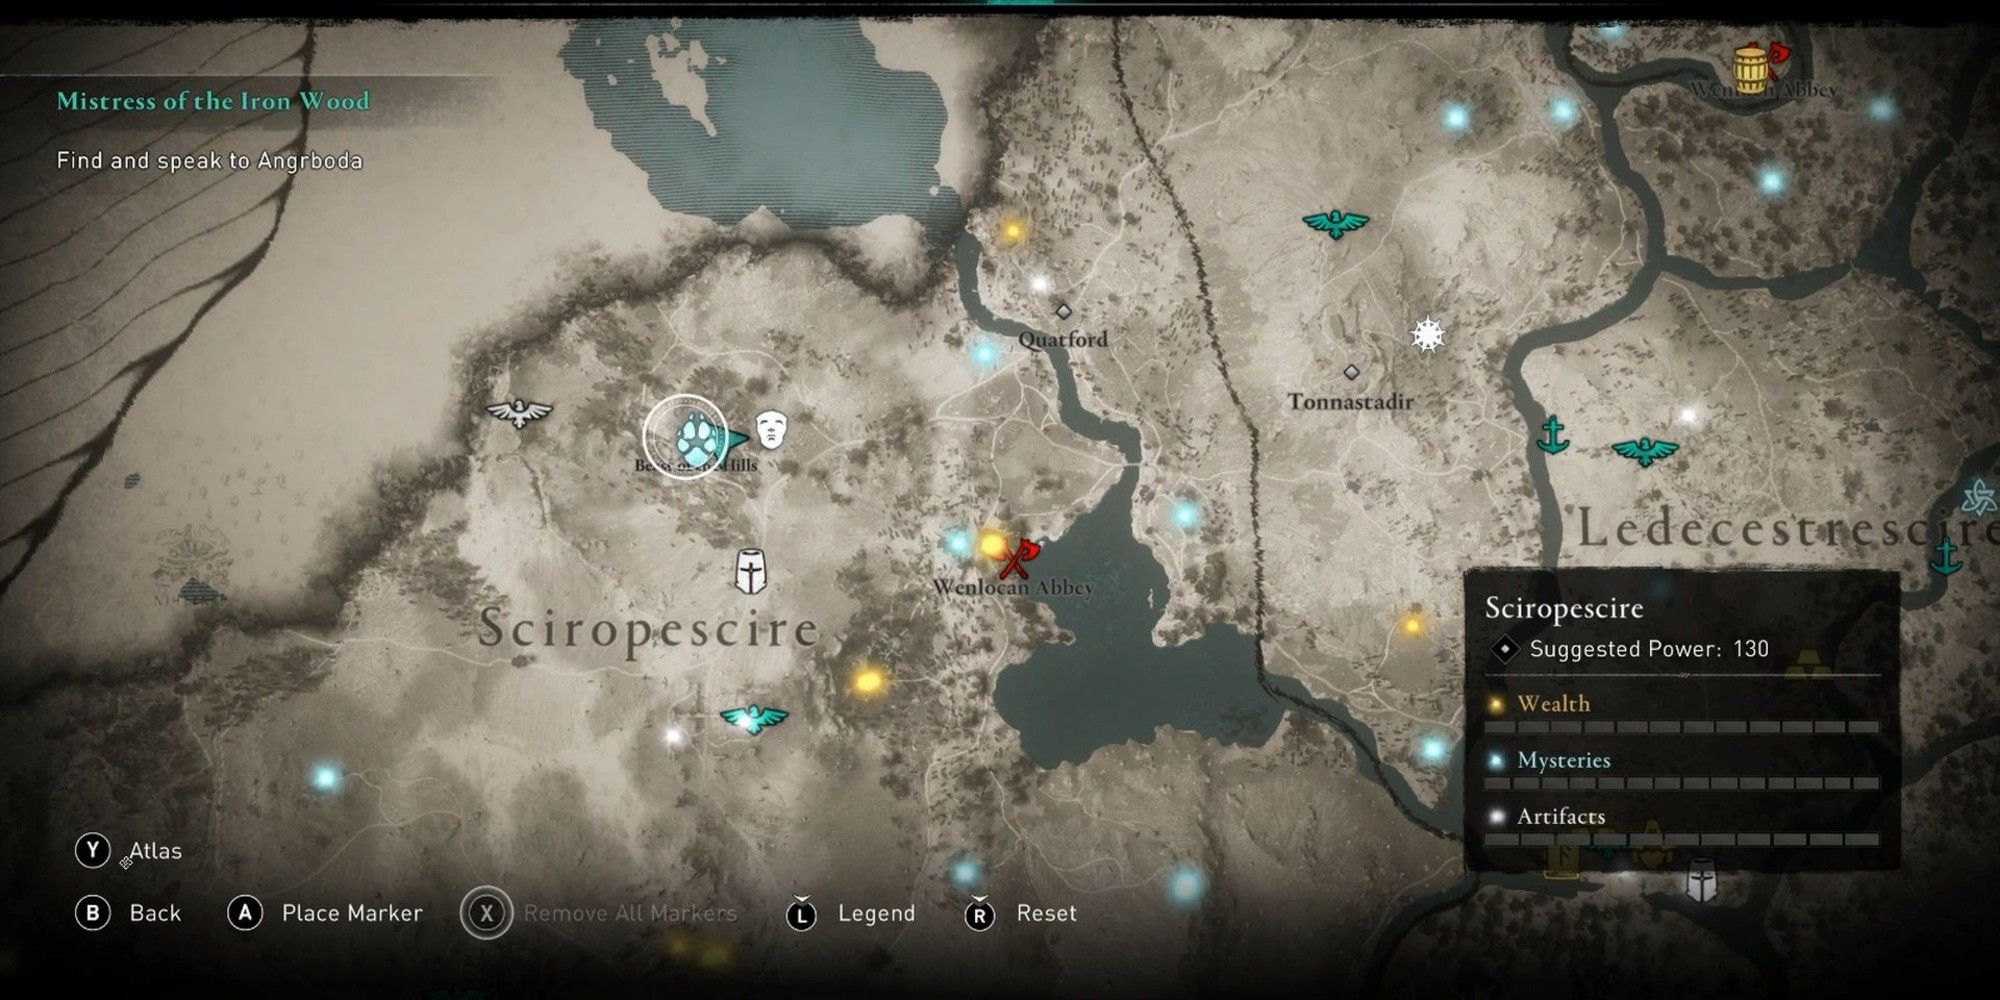 How to Find The Legendary Beast of the Hills Location in Assassin’s Creed Valhalla